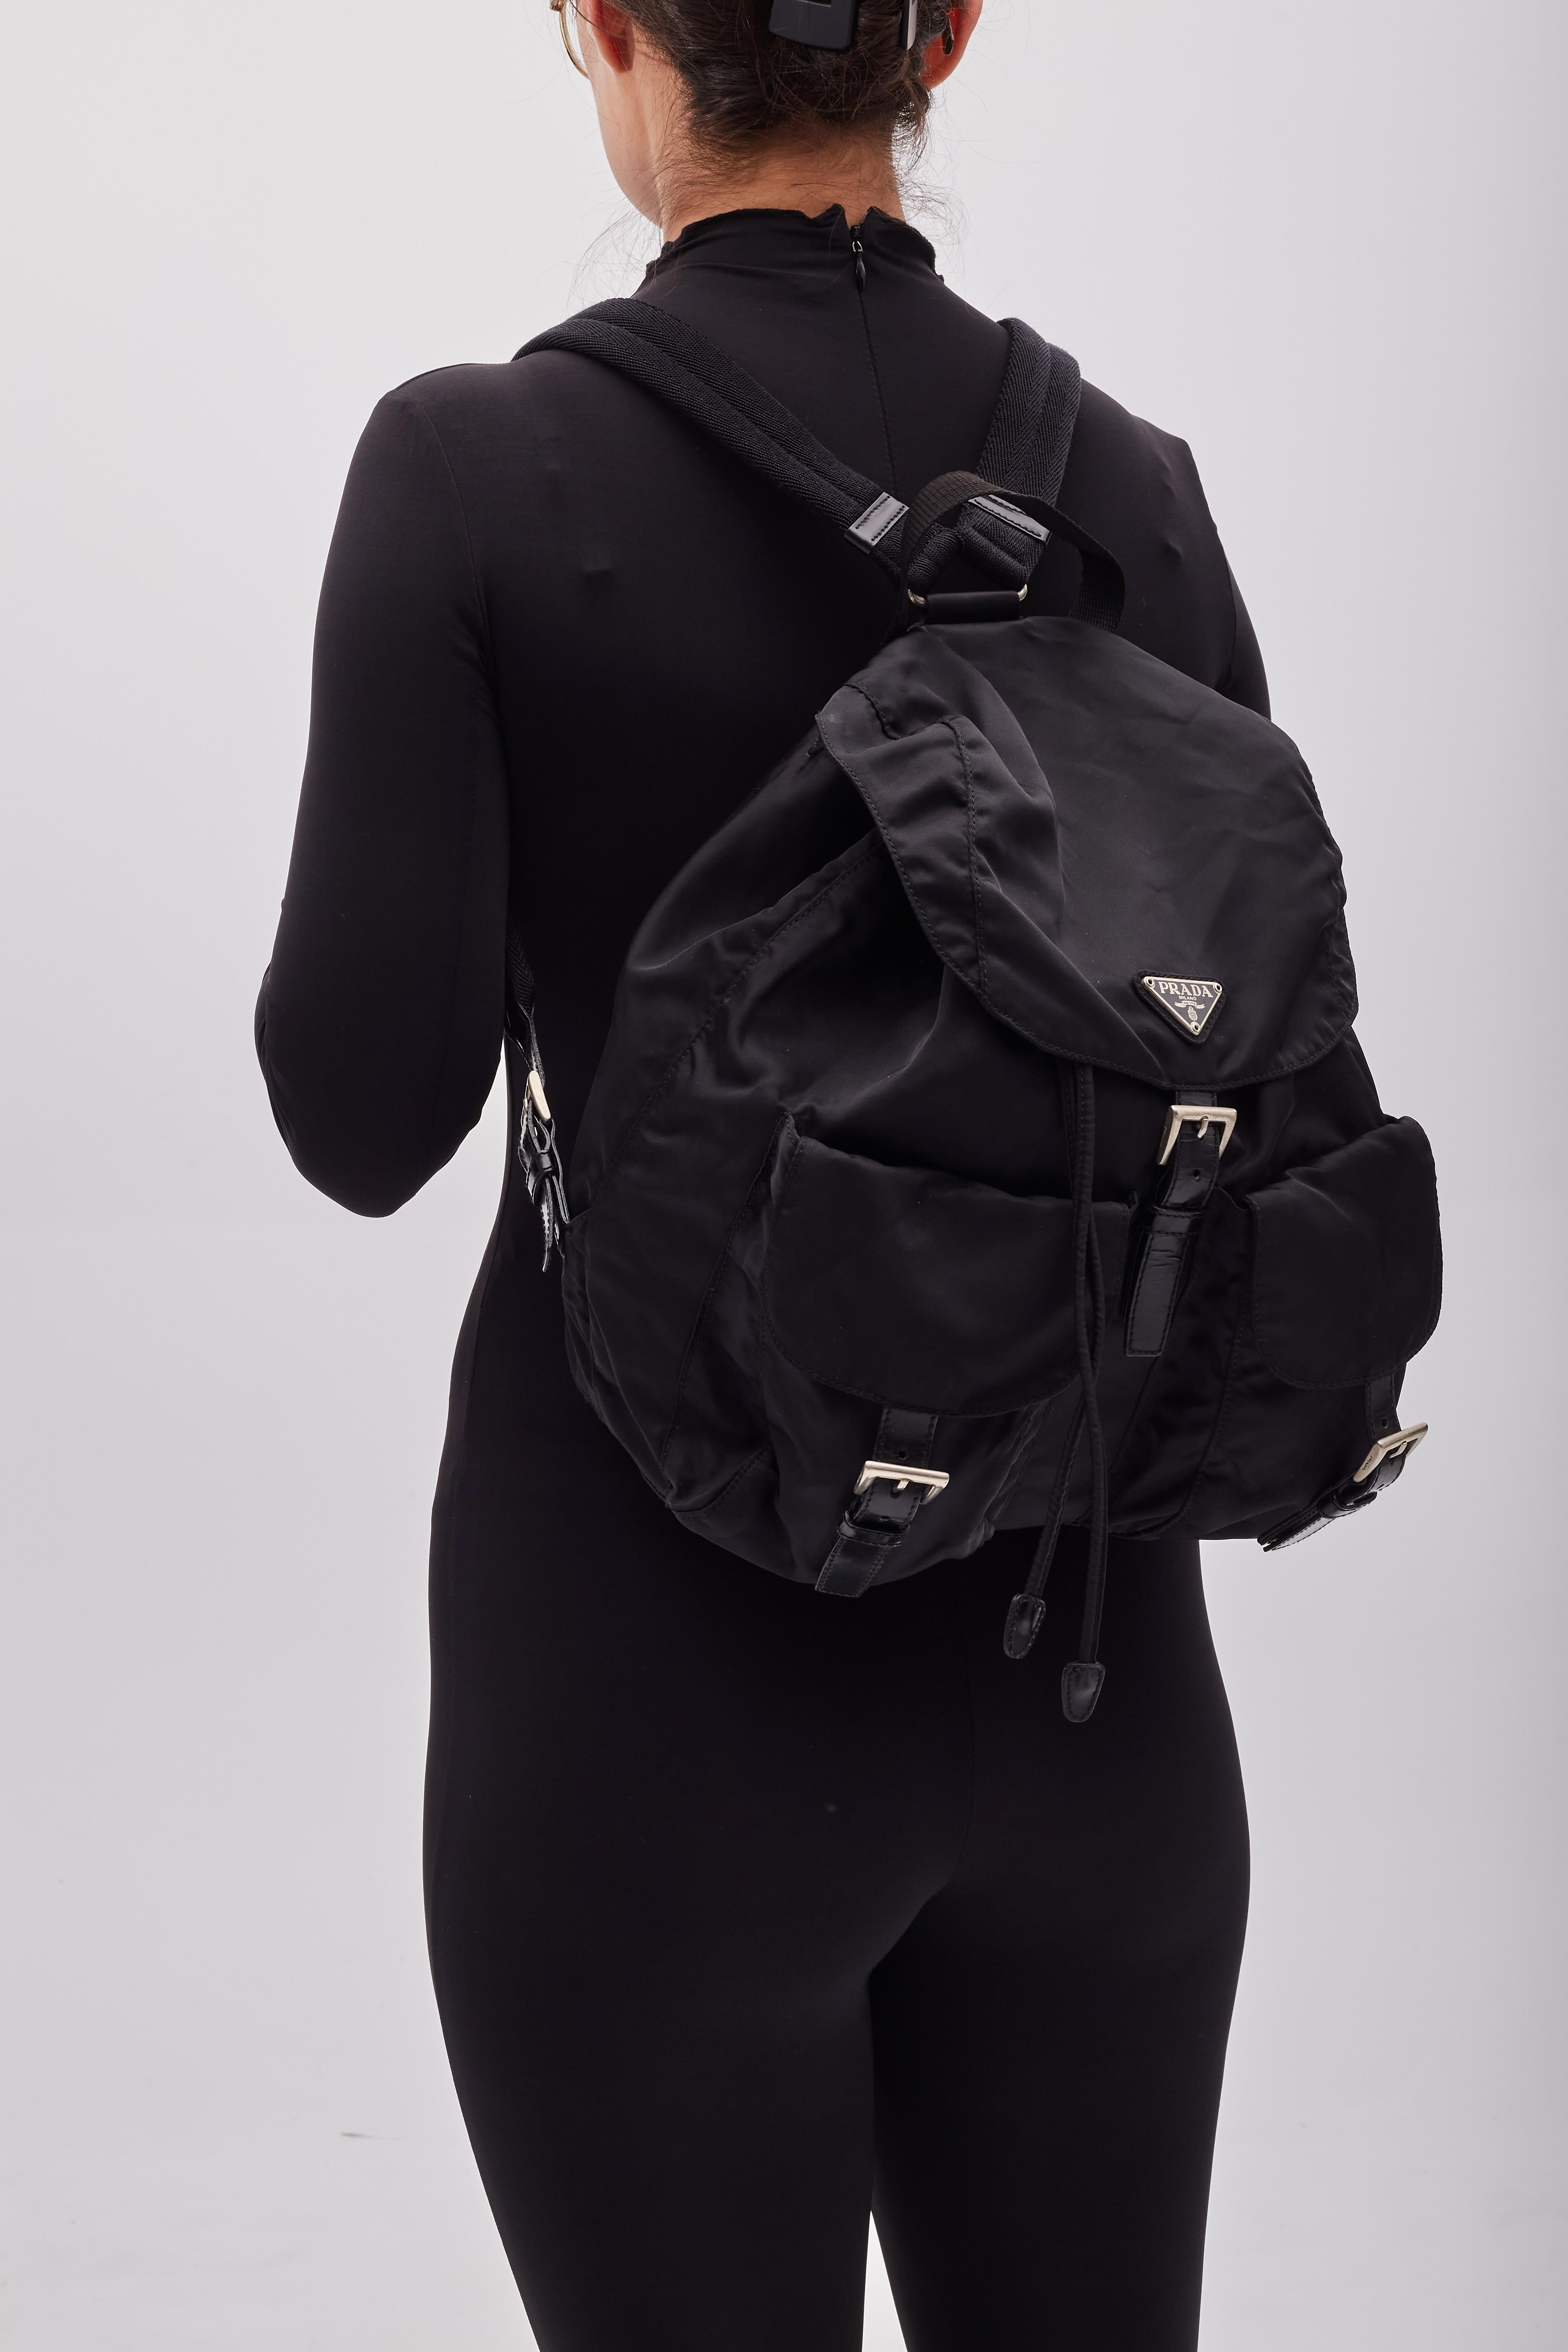 This Prada black Nylon Backpack is great for travel or running errands. The bag features signature black nylon fabric, leather trim, two front pockets and adjustable canvas straps.

Color: Black
Material: Nylon
Item code: 50
Model: B2811
Comes with: